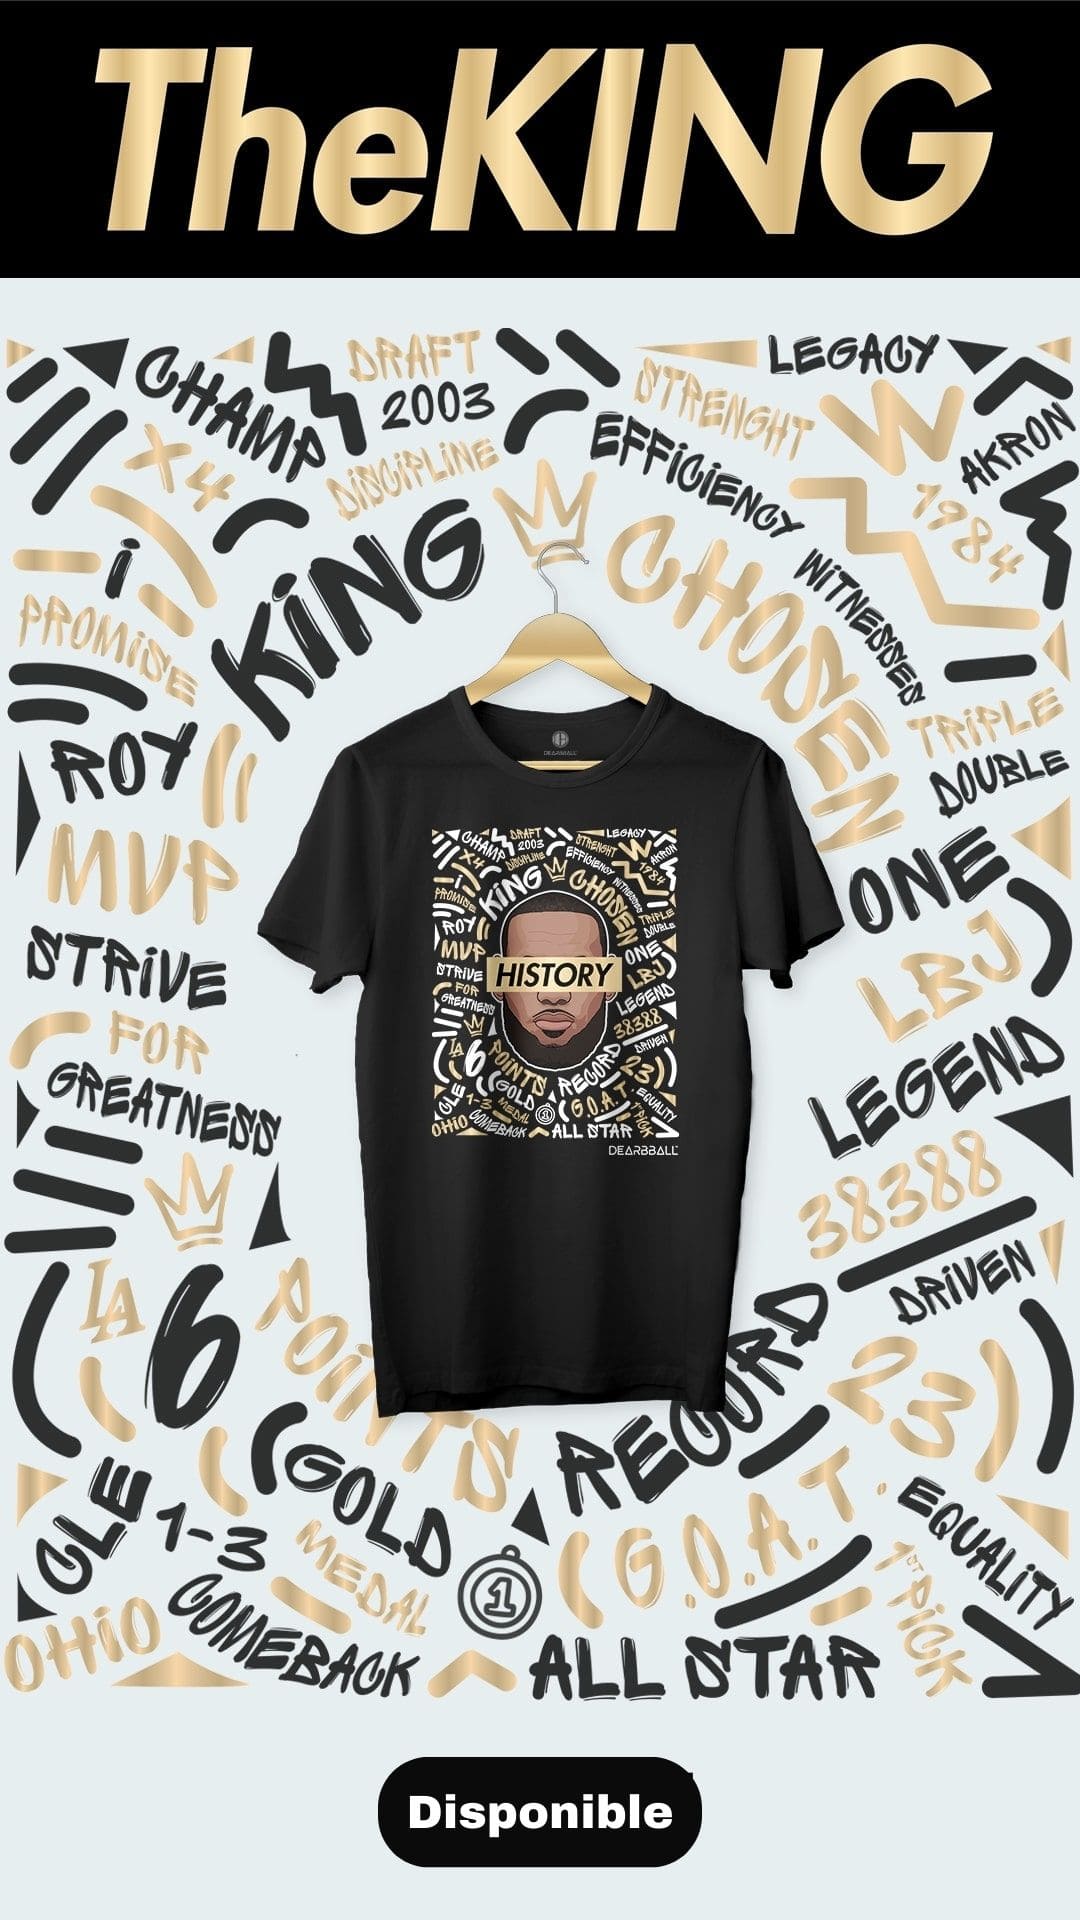 DearBBall Fashion Short - KING All-Time Scoring Leader Black Edition -  DearBBall™